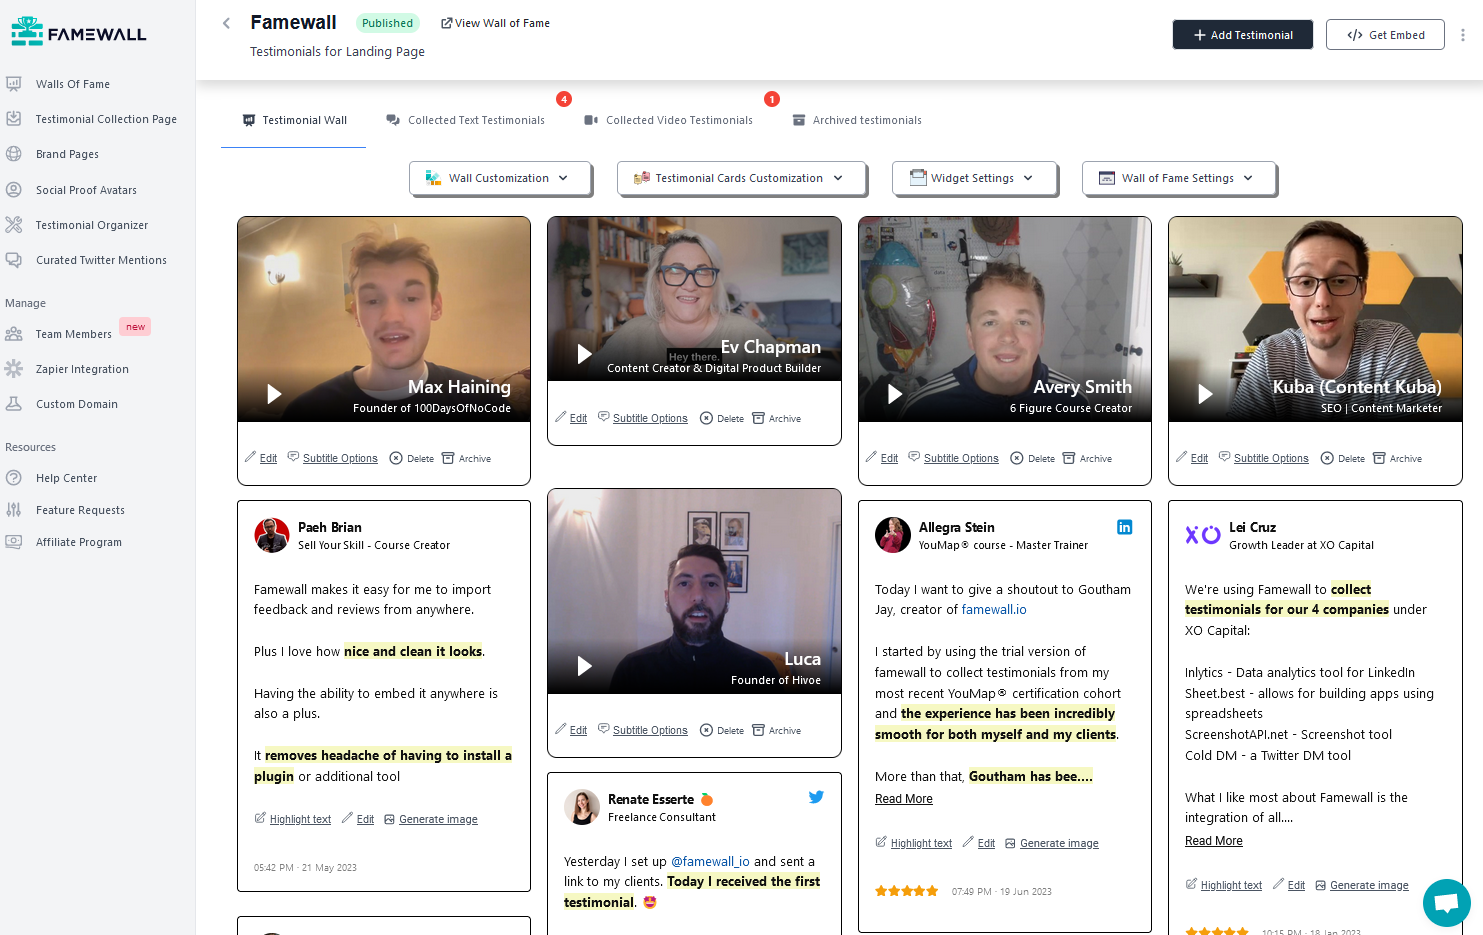 Support for Video Testimonials